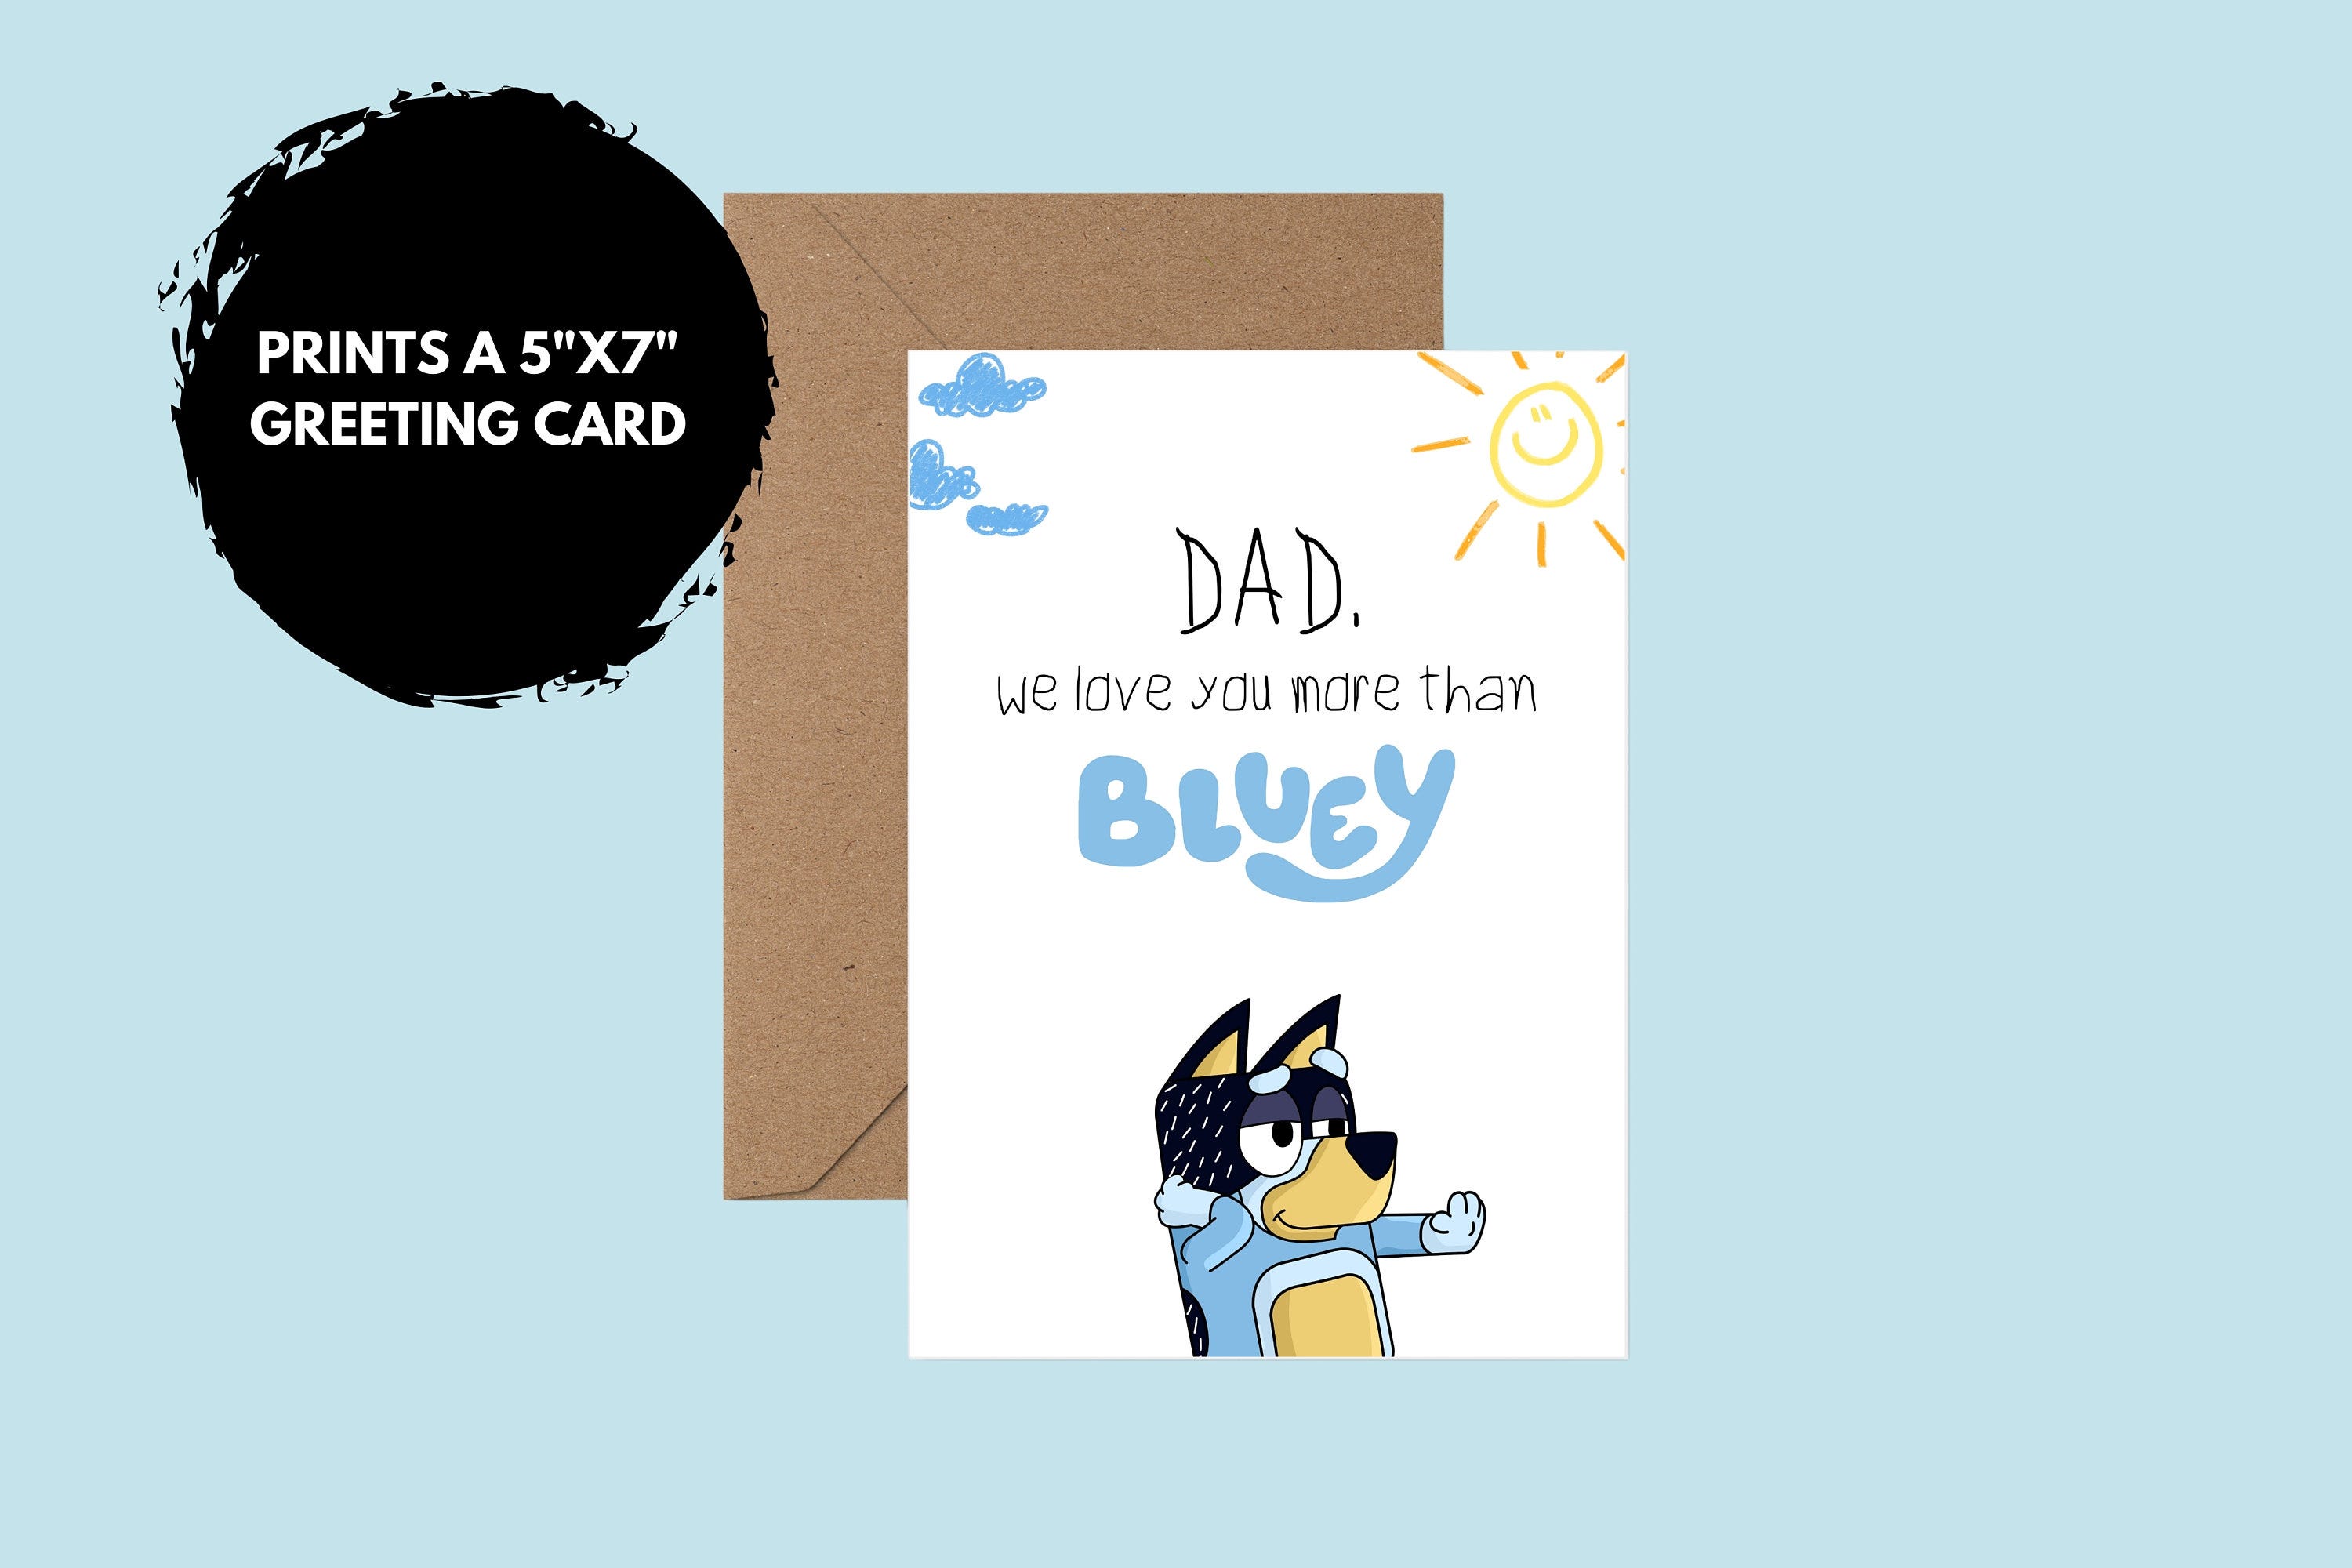 Printable Bluey Card for Dad’s Birthday, Print Card at Home, Cute Printable Bluey Dad Card, Card For Bluey Dad, Bandit Card from the Kid(s)